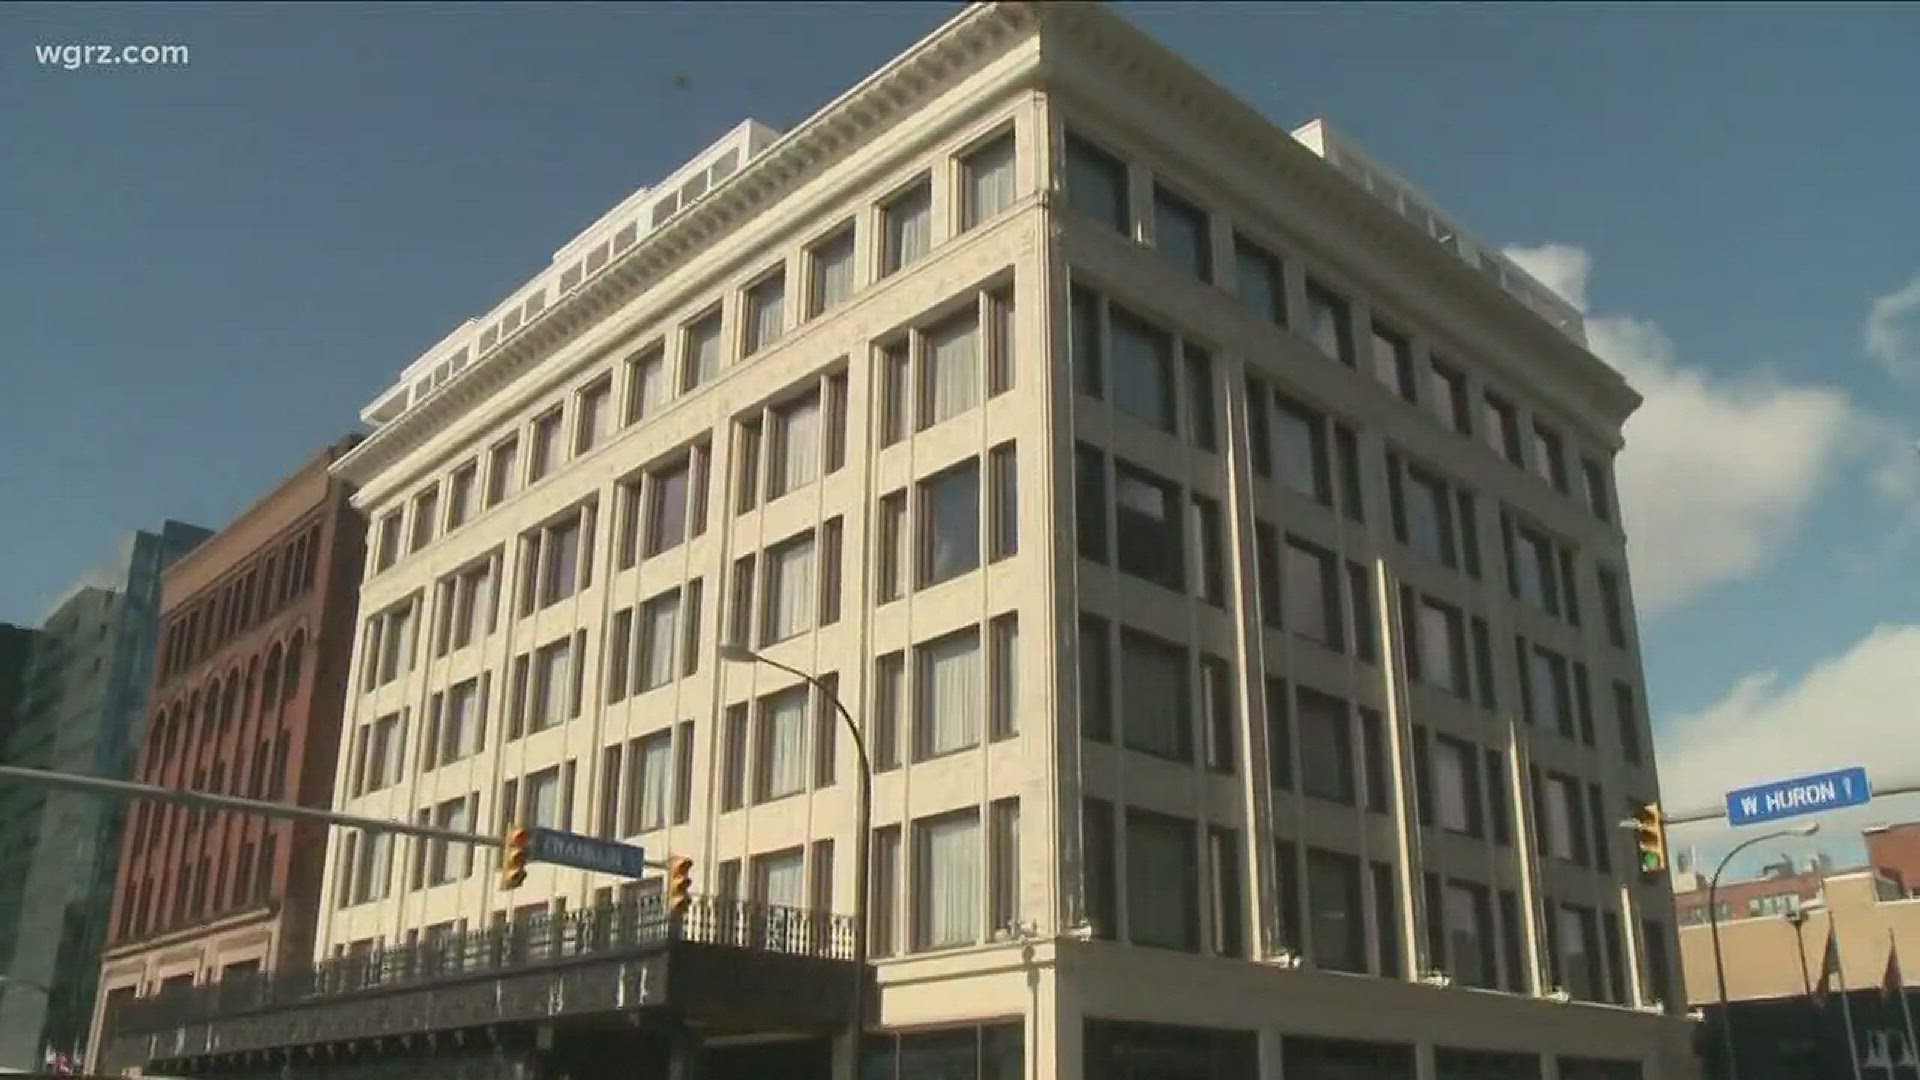 2 Men Accuse Curtiss Hotel Of Racism